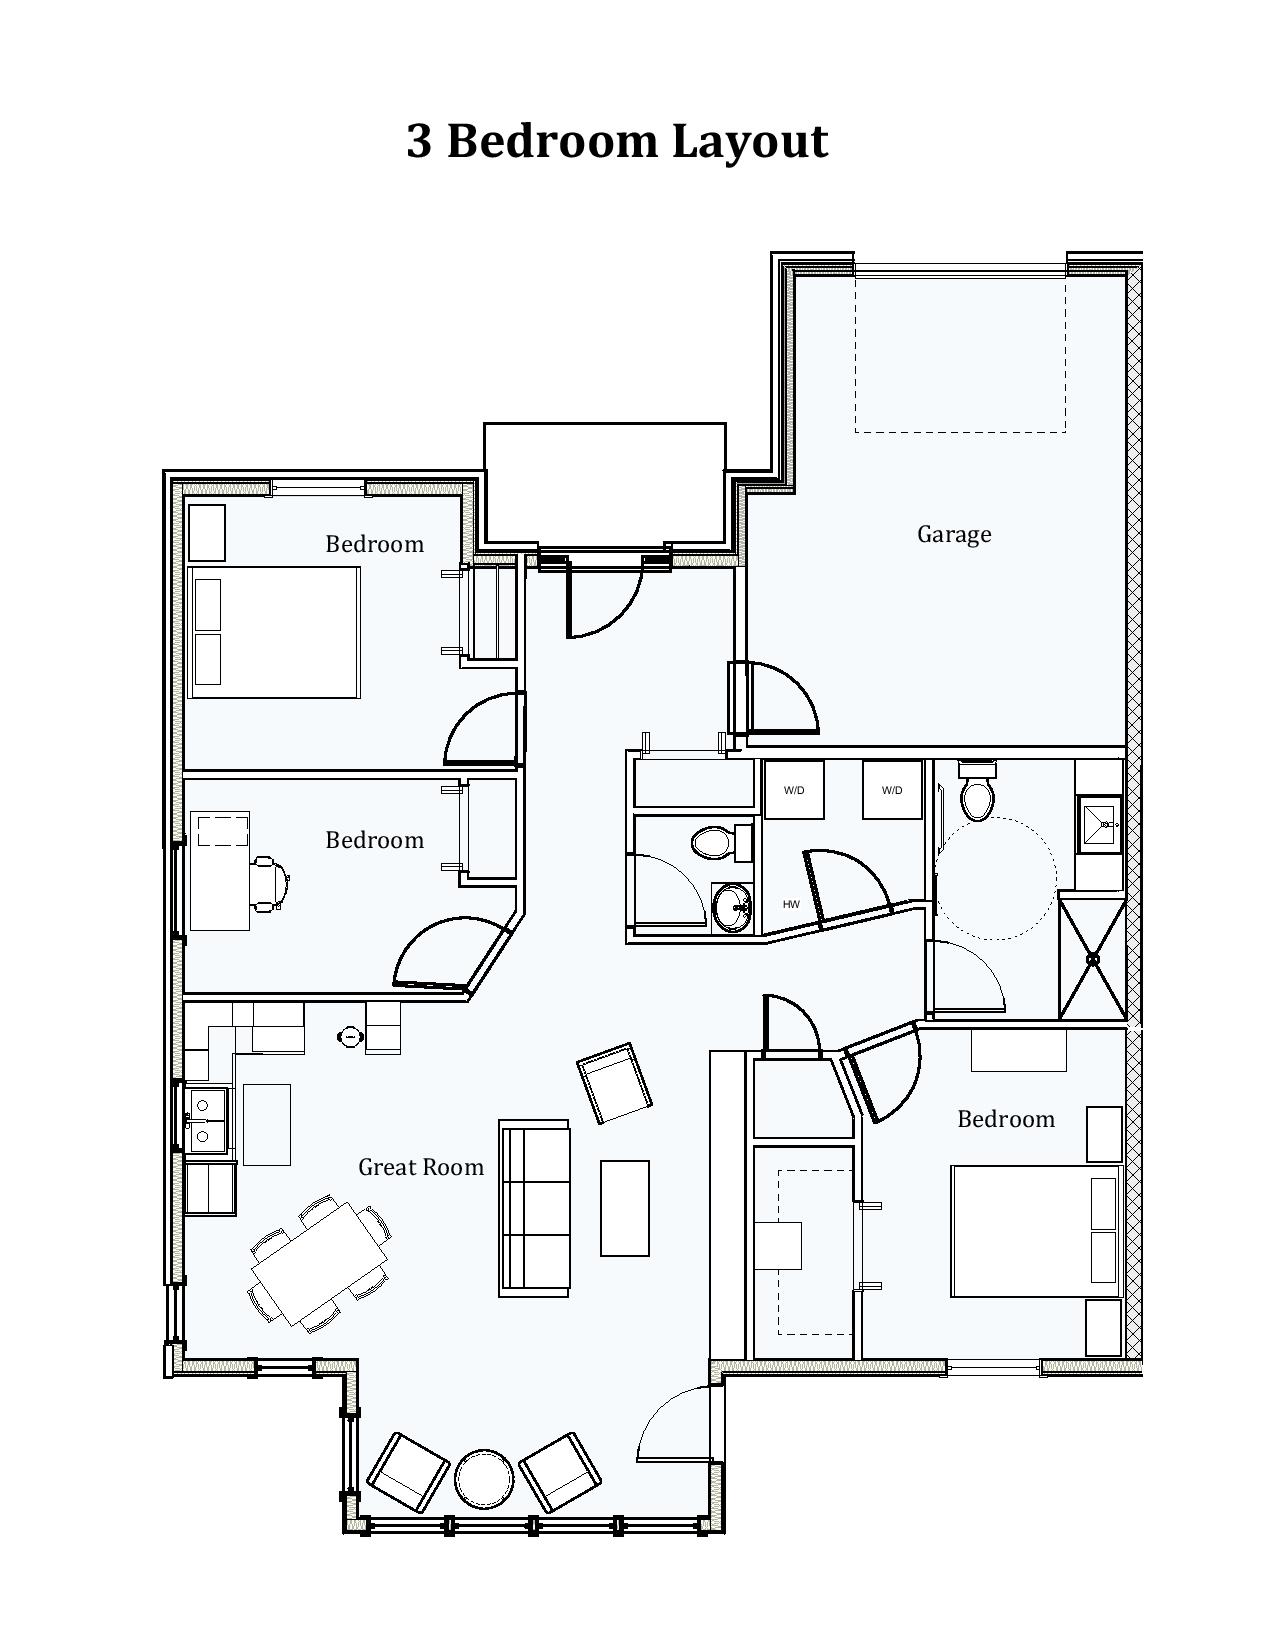 TAE 3 bedroom-page-001